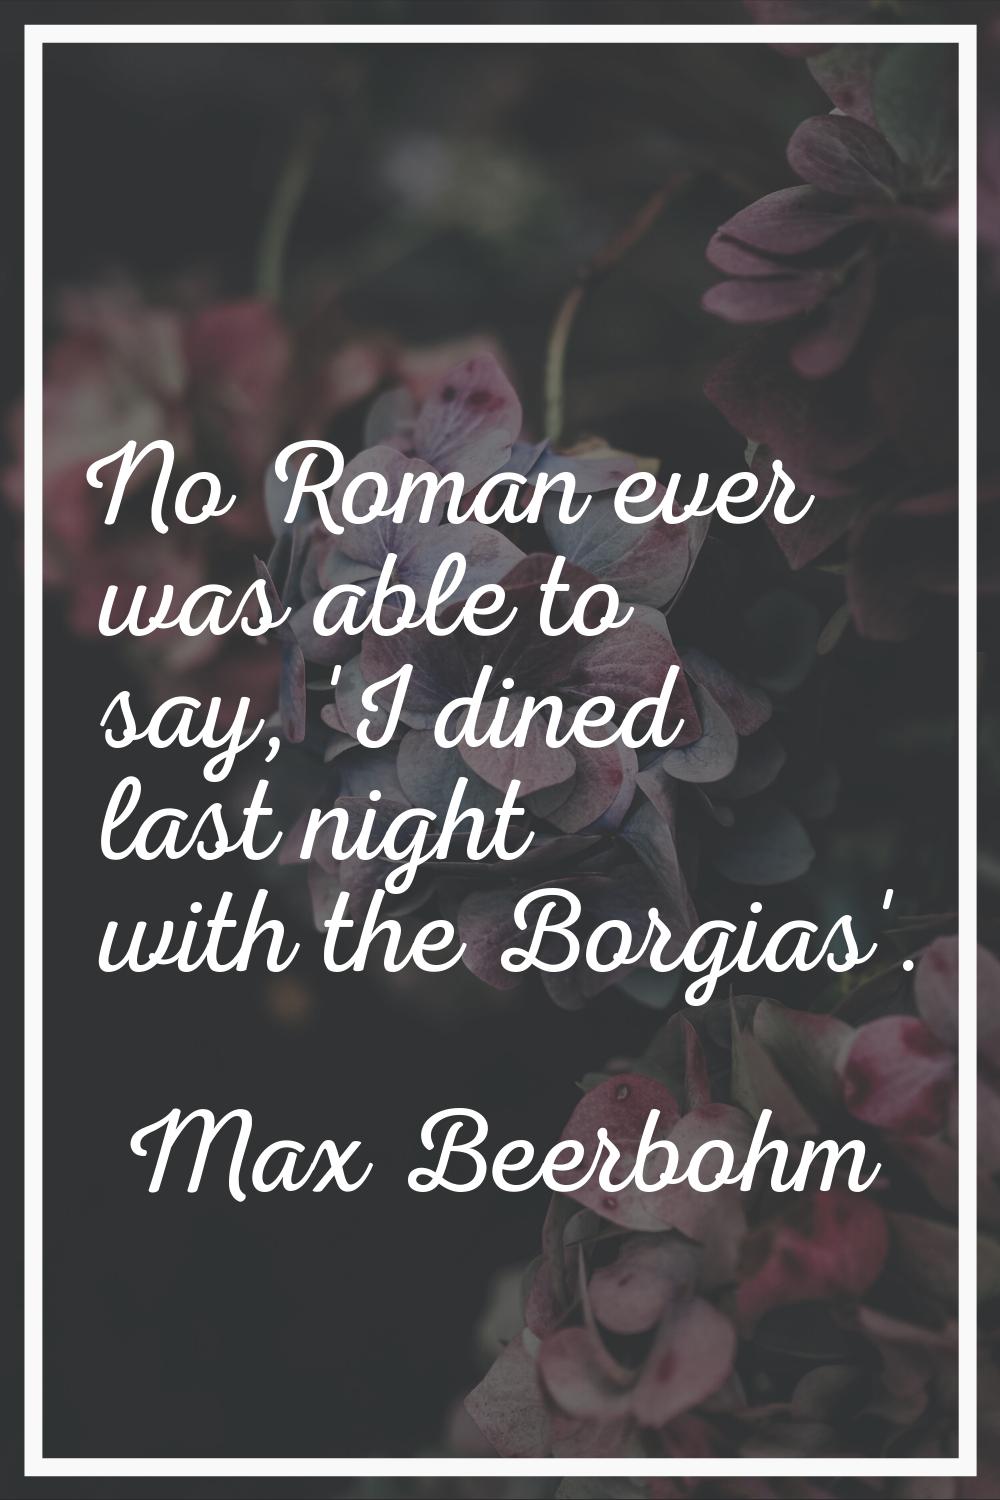 No Roman ever was able to say, 'I dined last night with the Borgias'.